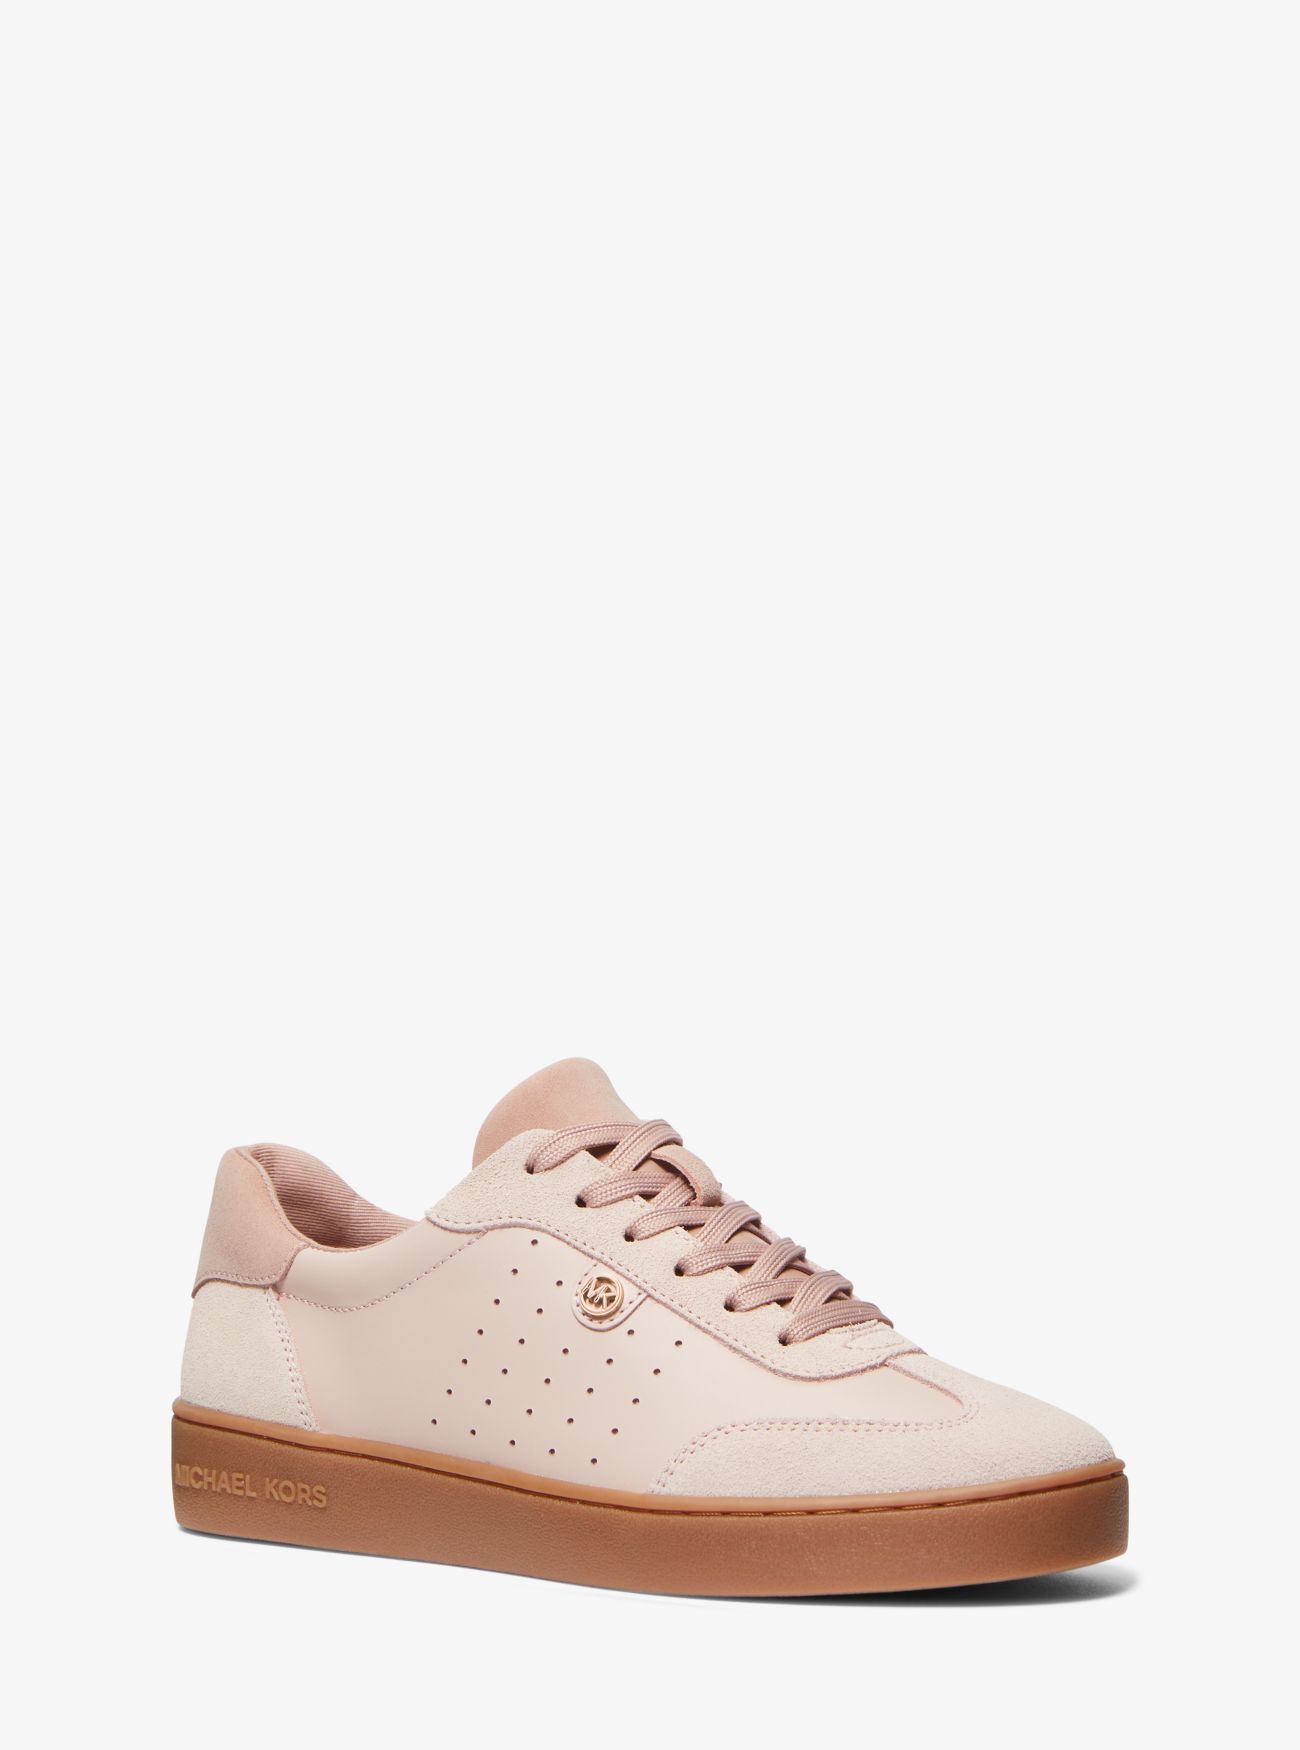 MK Scotty Leather Trainers - Pink - Michael Kors